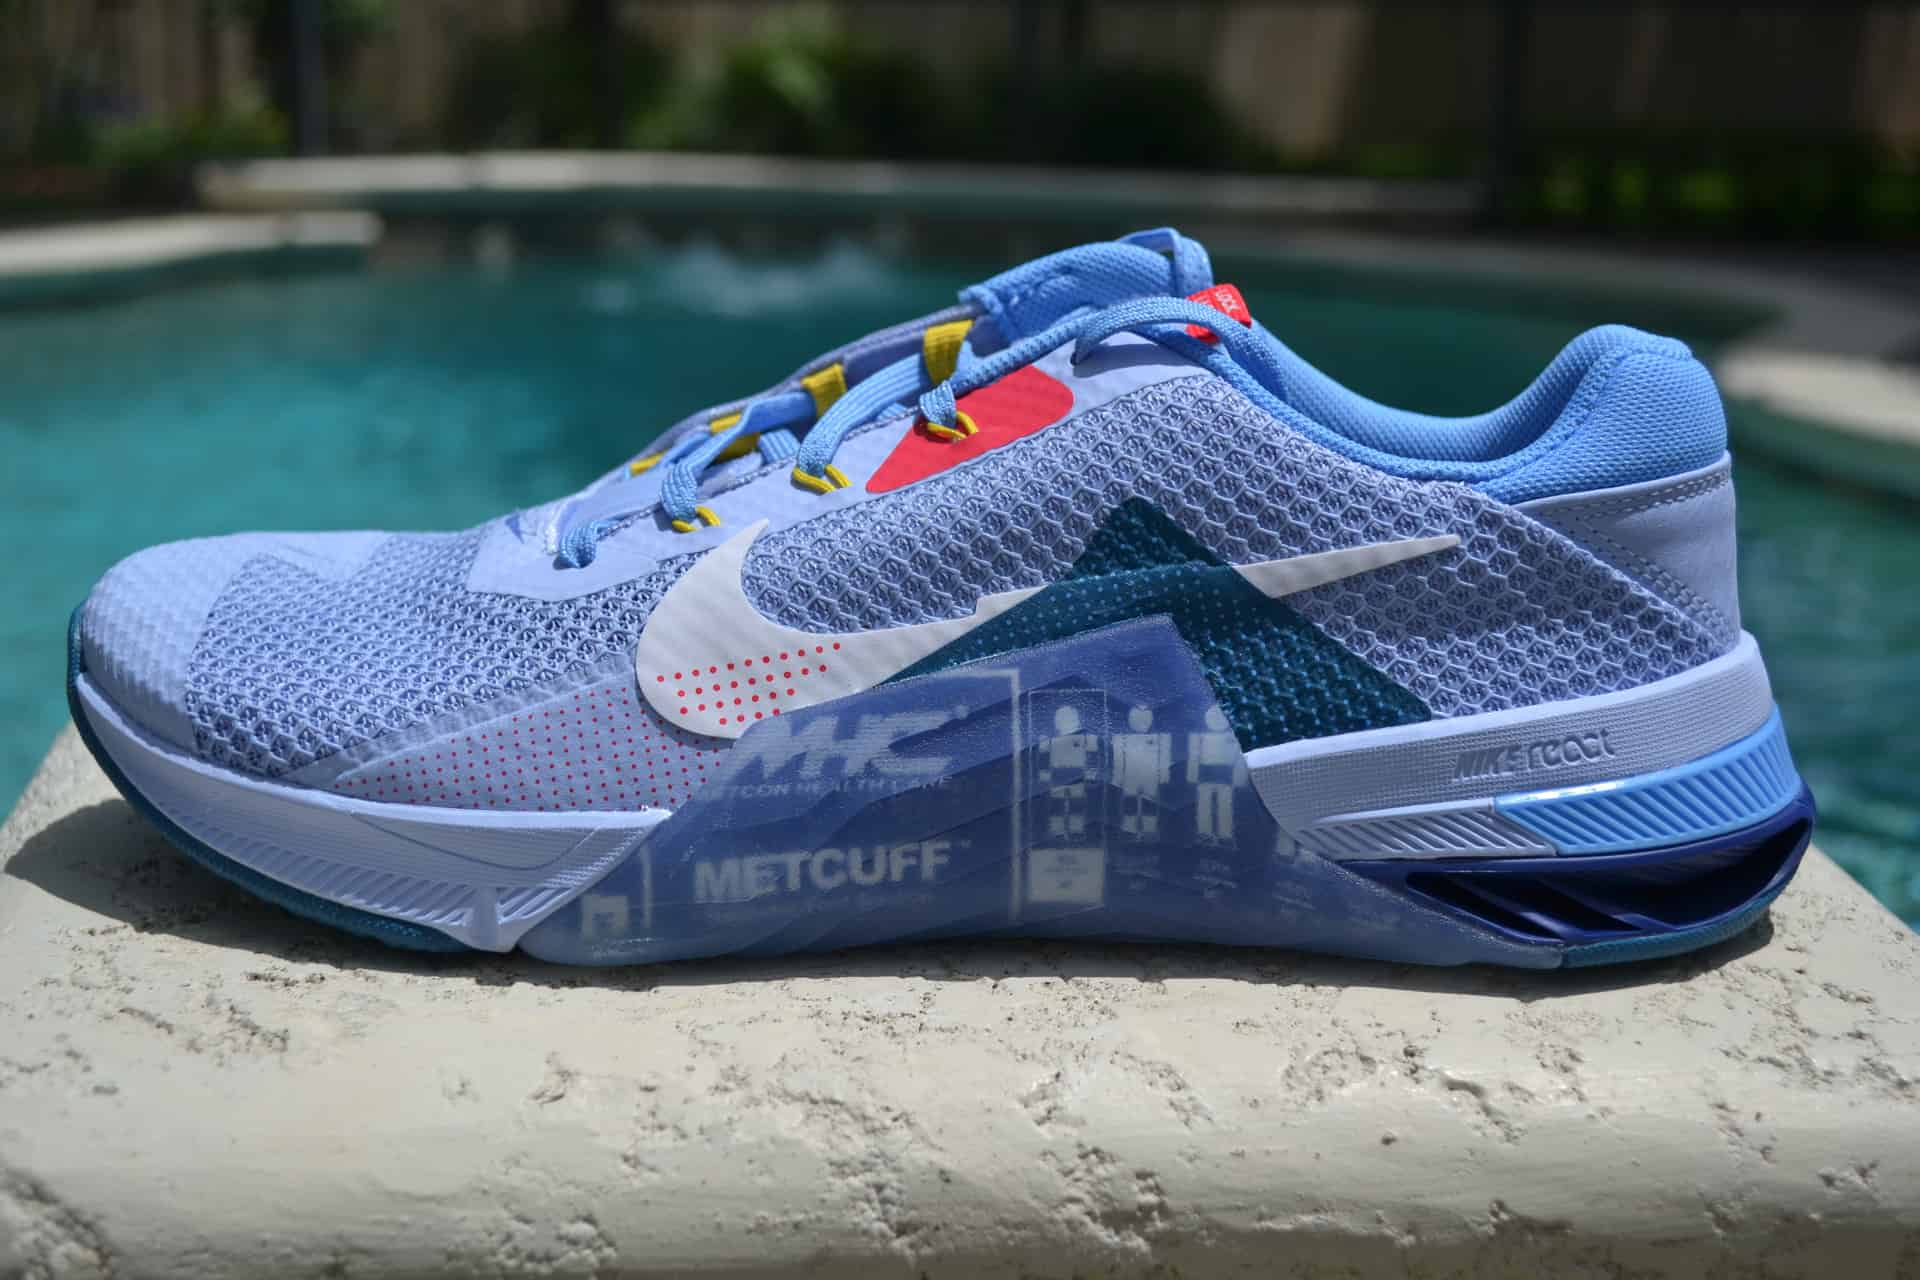 Nike Metcon 7 AMP Review - Fit at Midlife